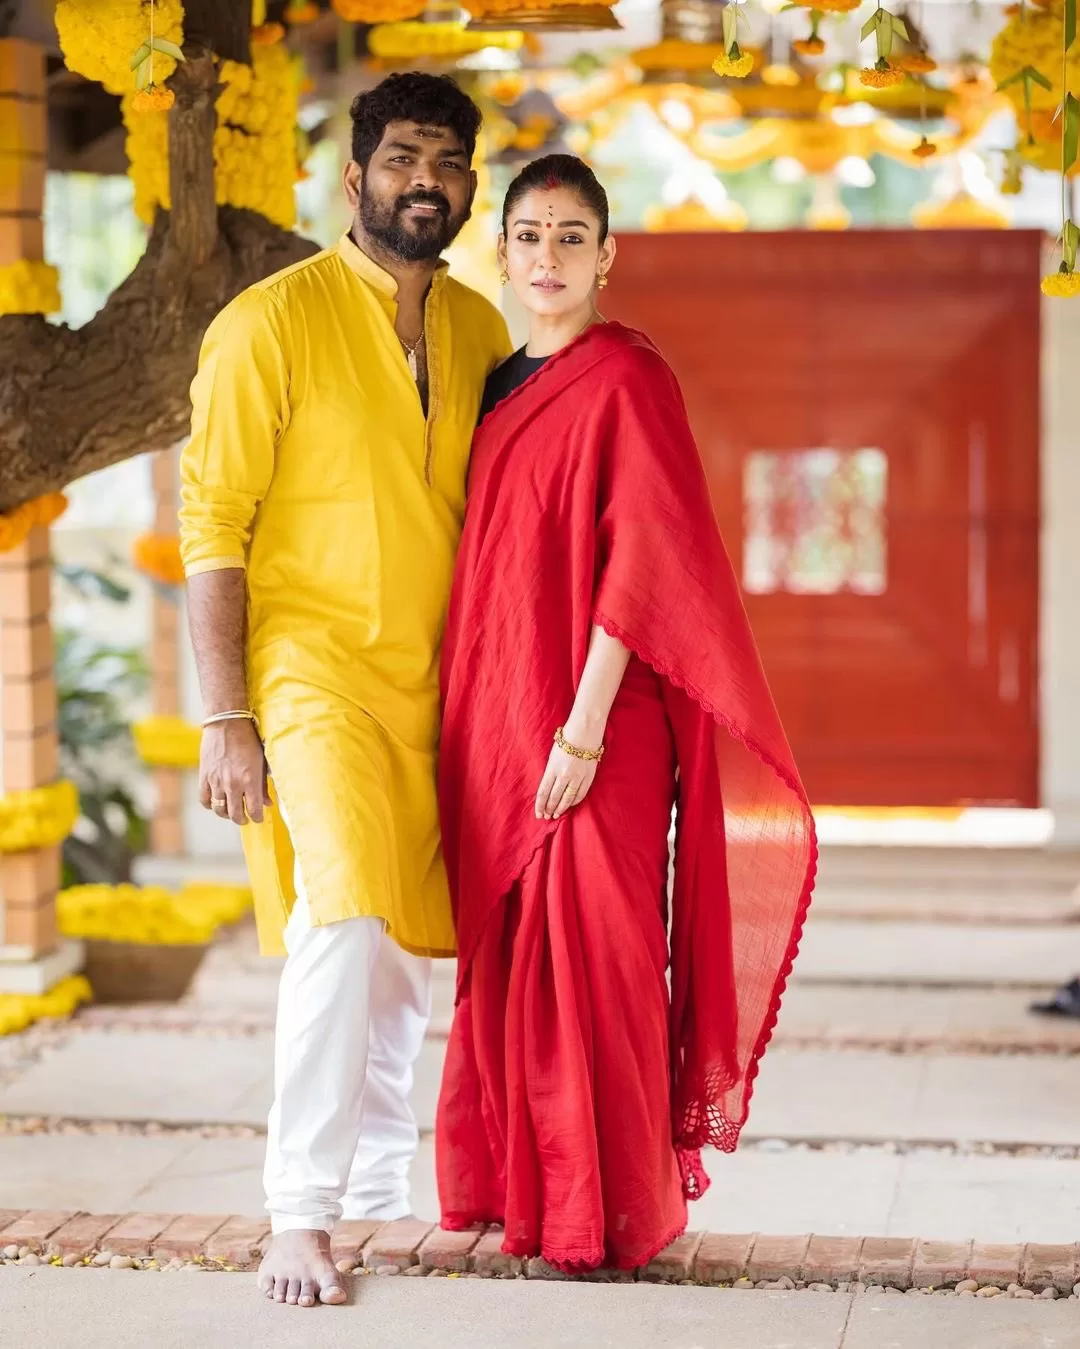 South Actress Nayanthara and Vignesh Shivan's Candid Moment Breaks the Internet: "Just Us" Nayanthara's Simple Yet Heartwarming Message on Social Media